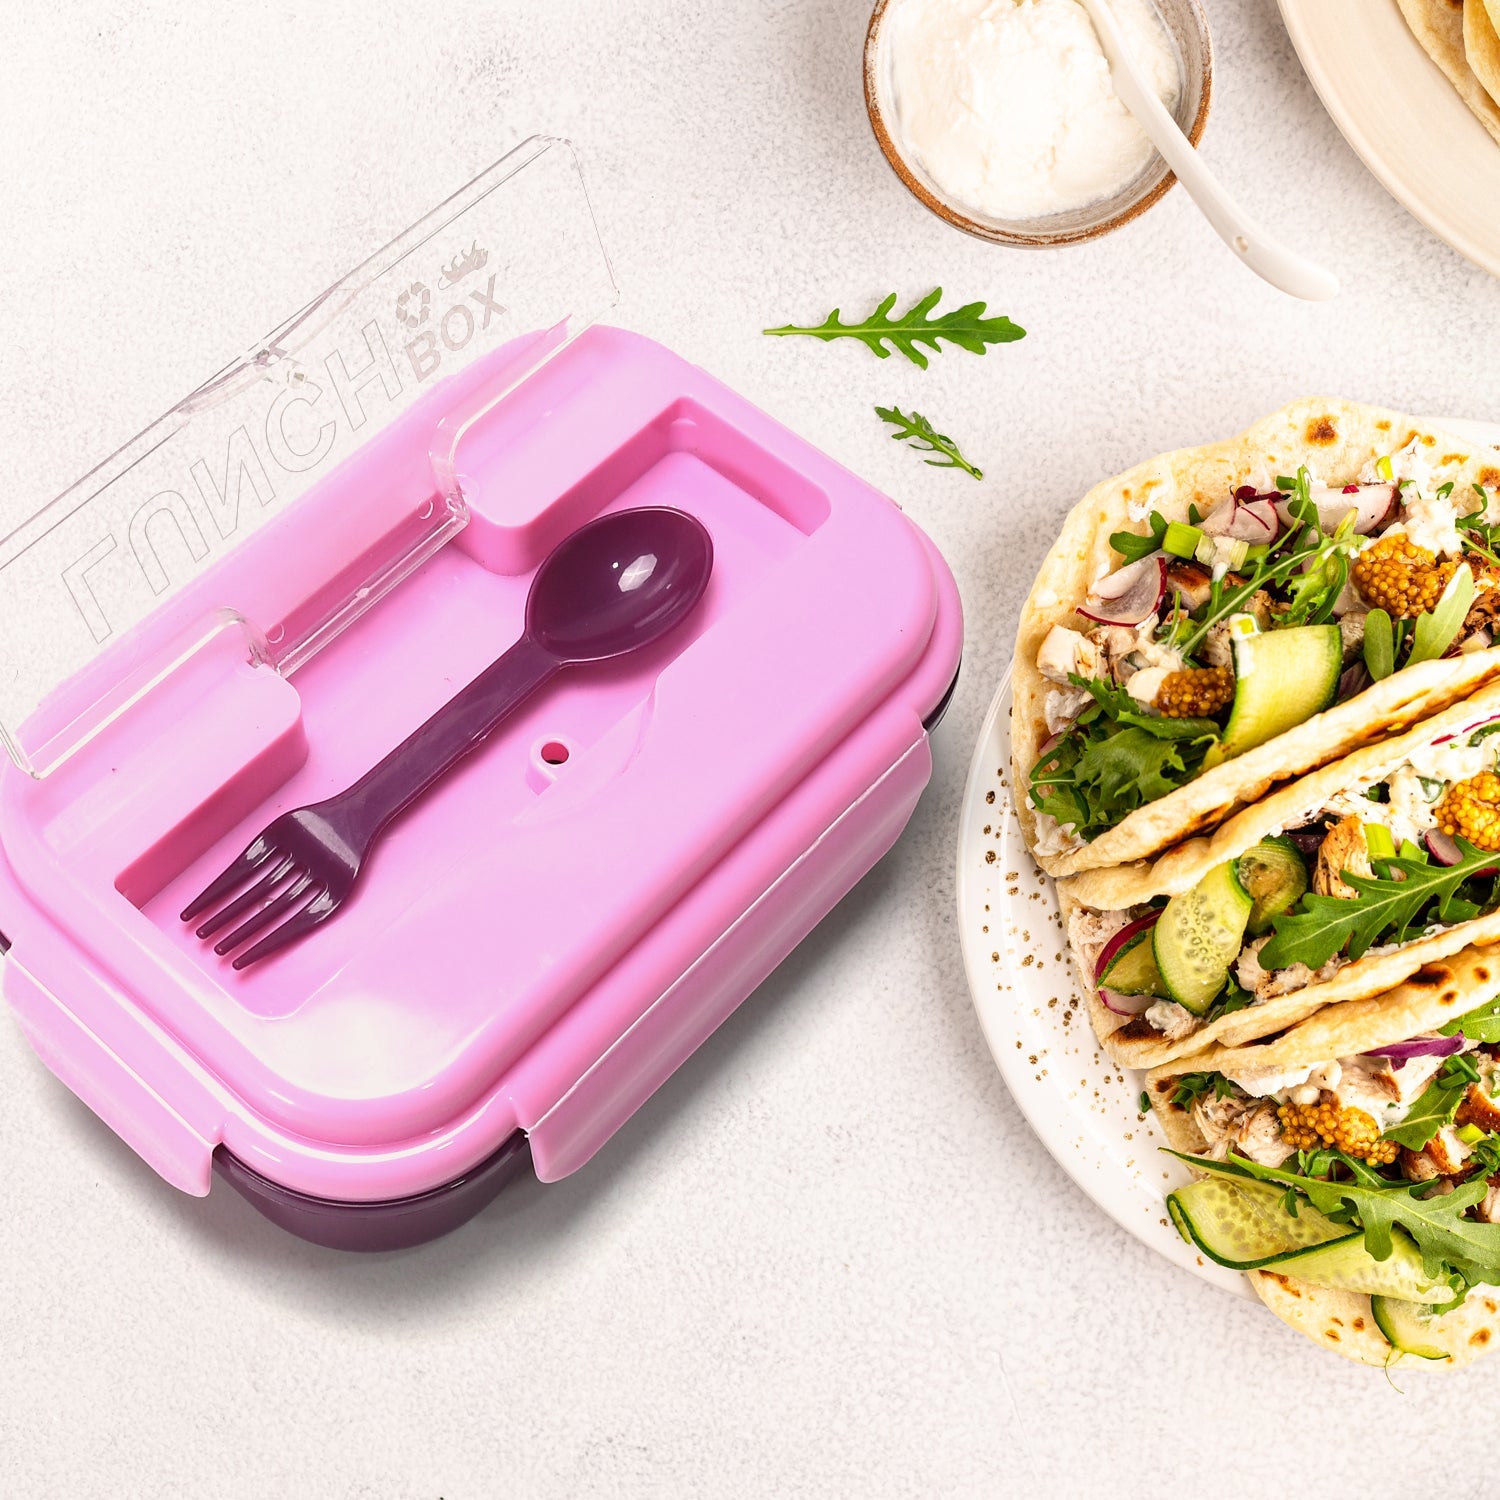 2809V LUNCH BOX 3 COMPARTMENT PLASTIC LINER LUNCH CONTAINER, PORTABLE TABLEWARE SET FOR OFFICE , SCHOOL & HOME USE DeoDap